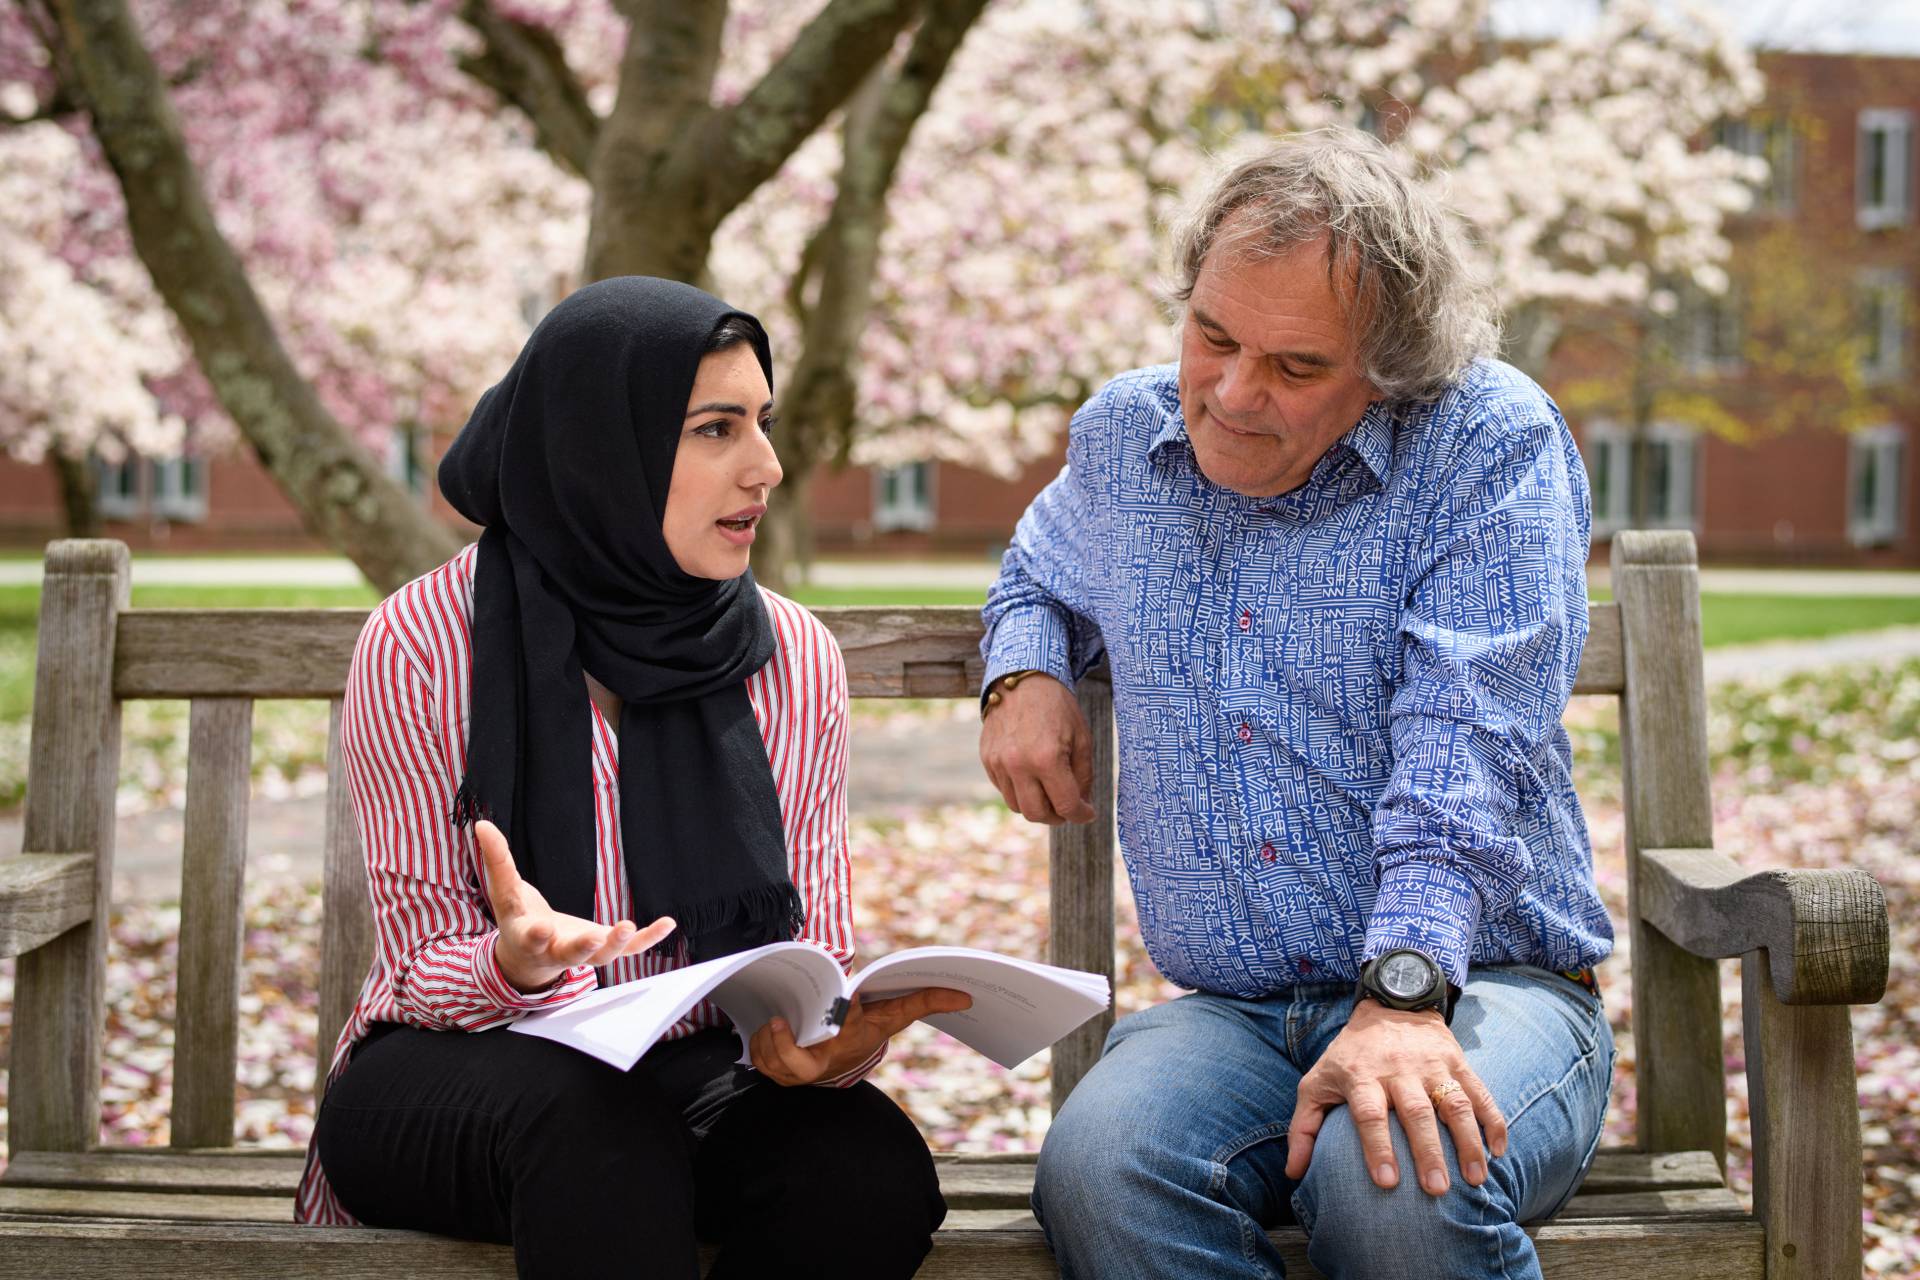 Raia Khan and professor Andrew Dobson sitting outside on bench